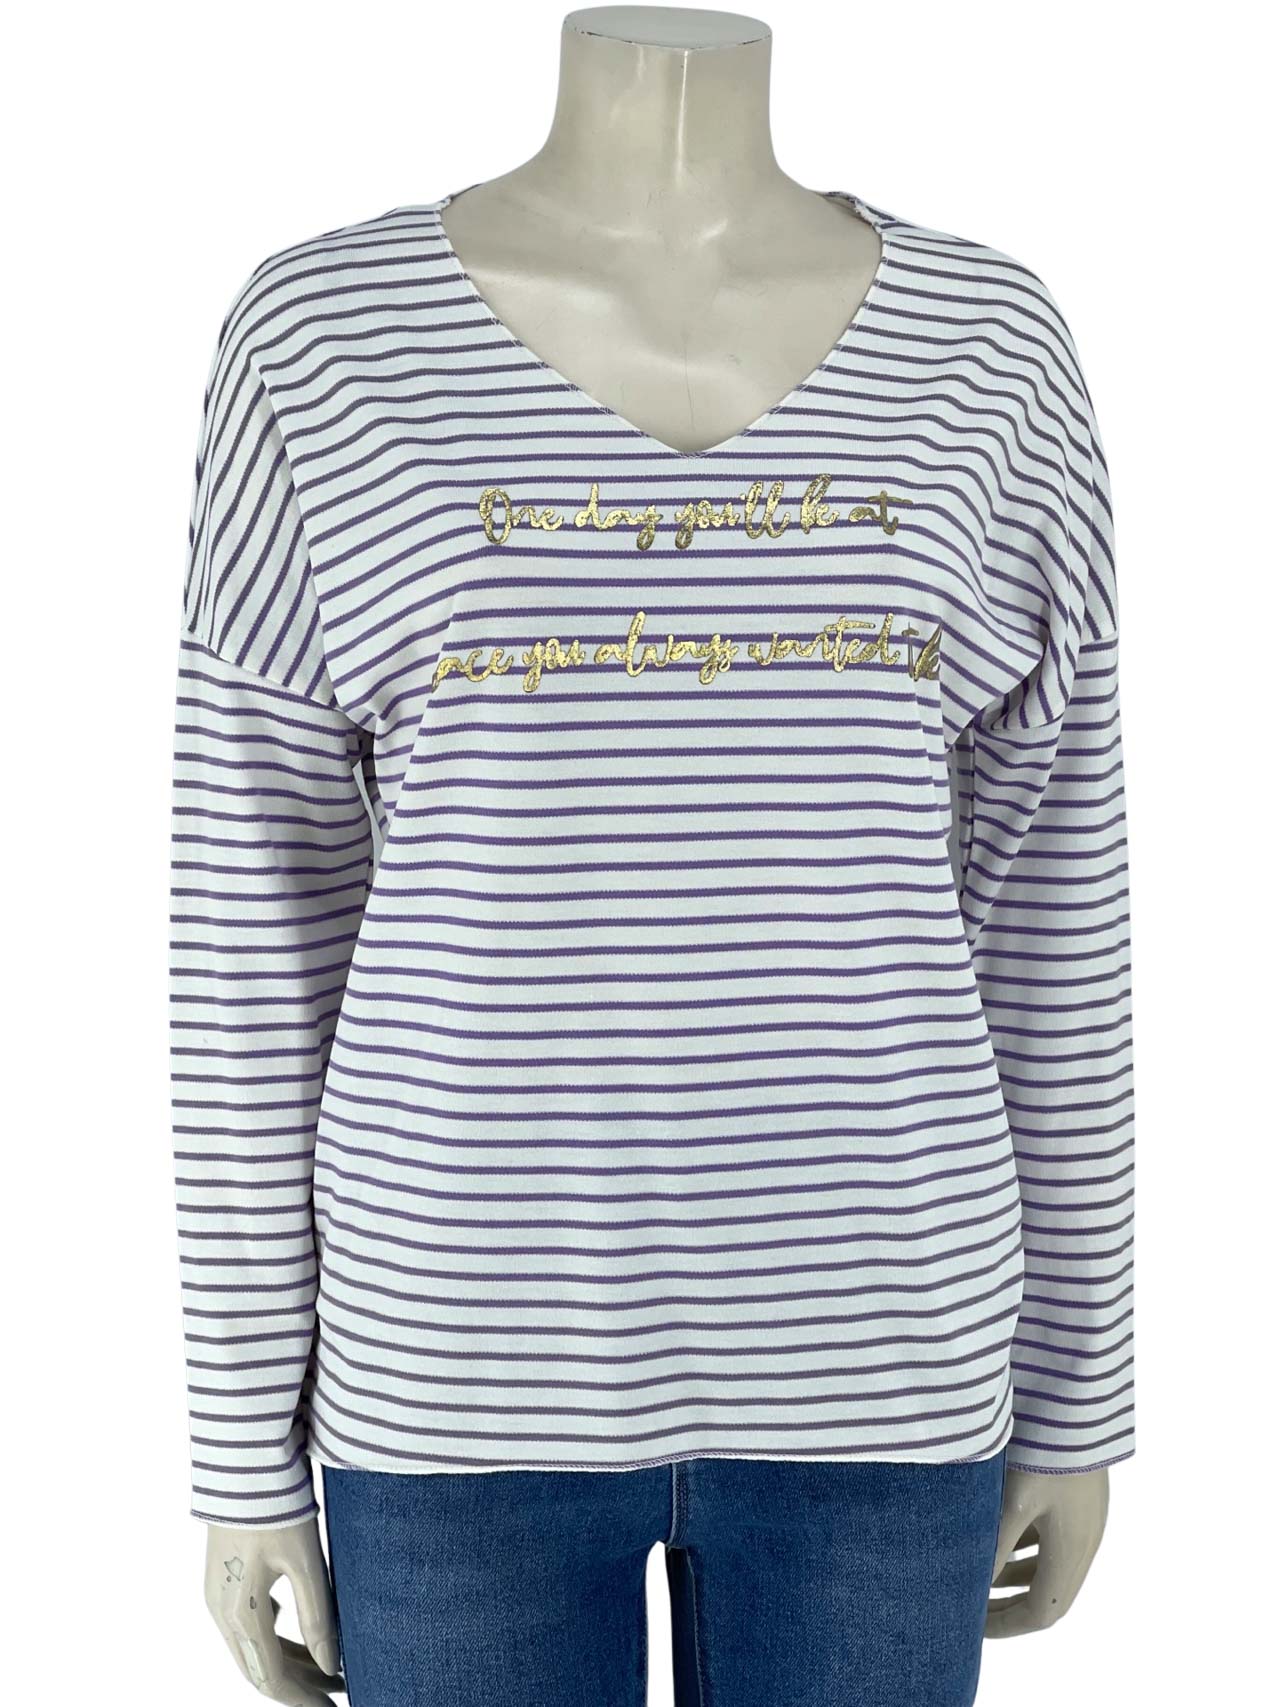 Women's V striped blouse with print code 22611